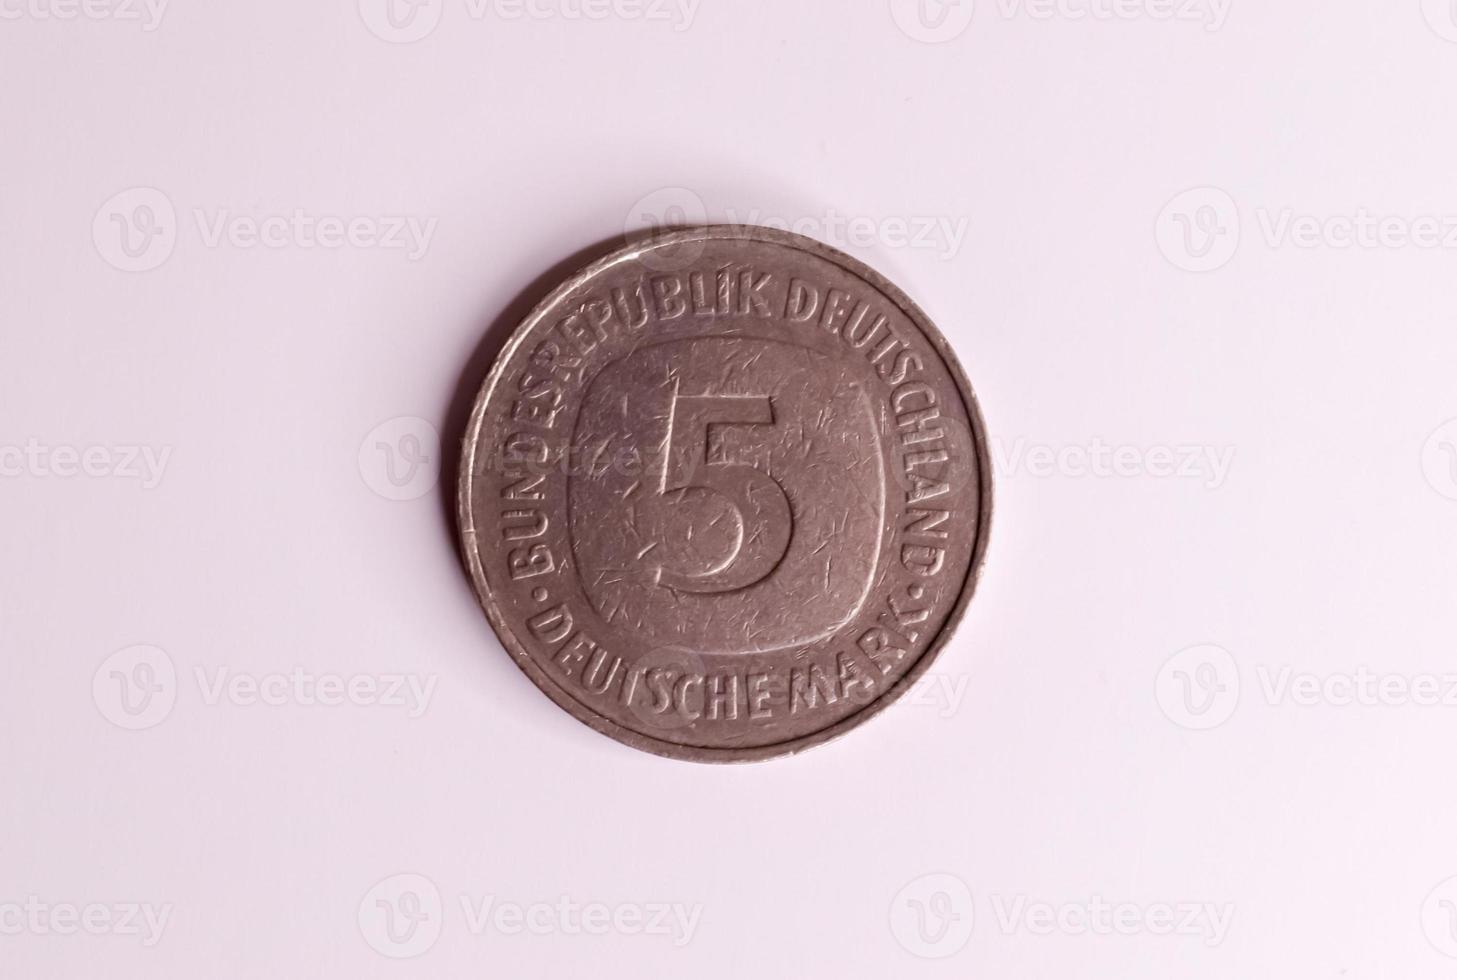 Single 5 DMark coin of the no longer current currency Deutsche Mark from Germany photo